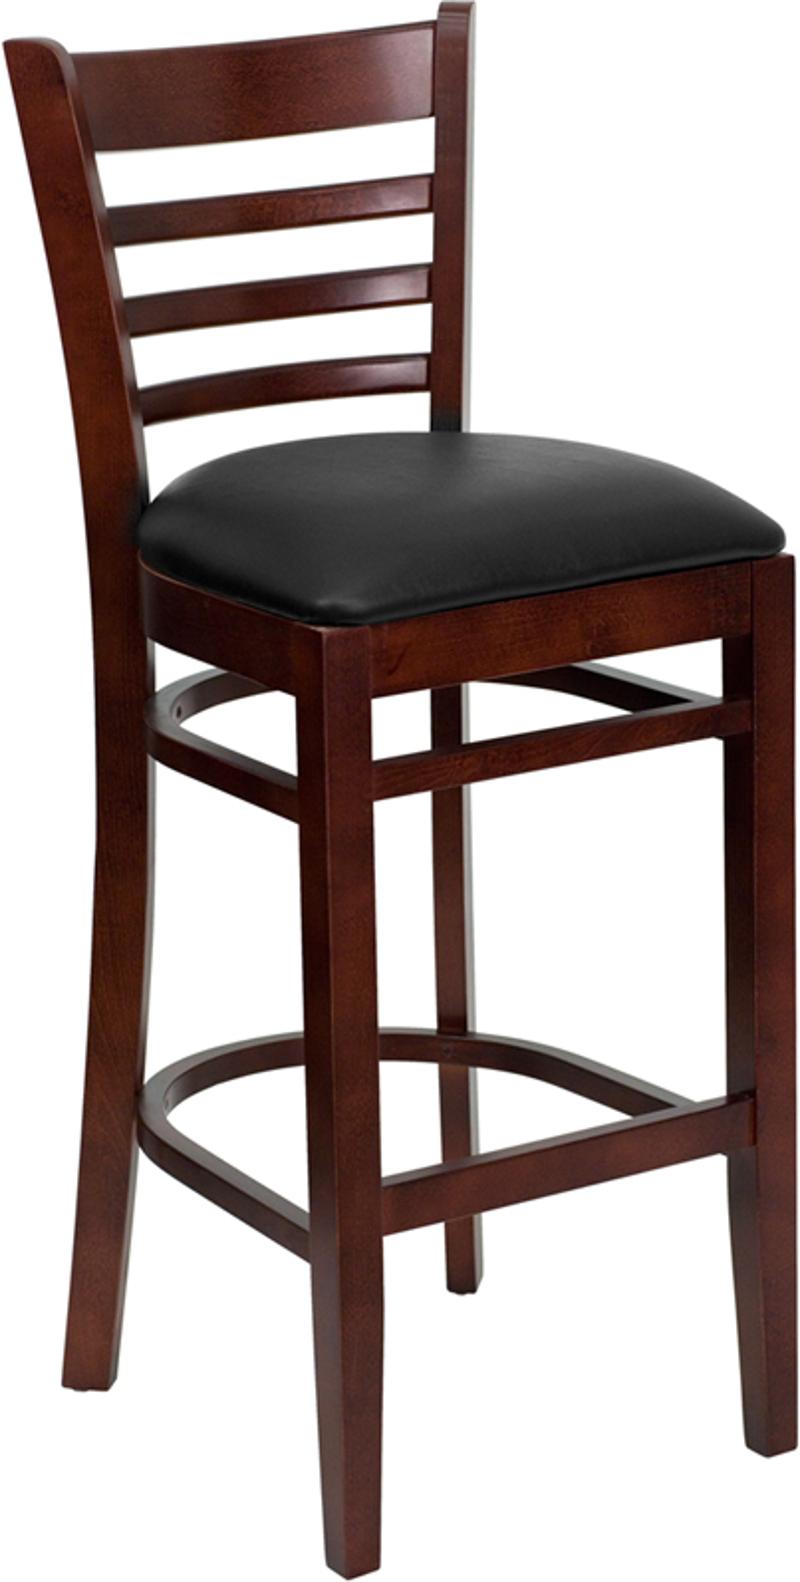 Brown And Black Upholstered Commercial, Commercial Bar Stools With Backs